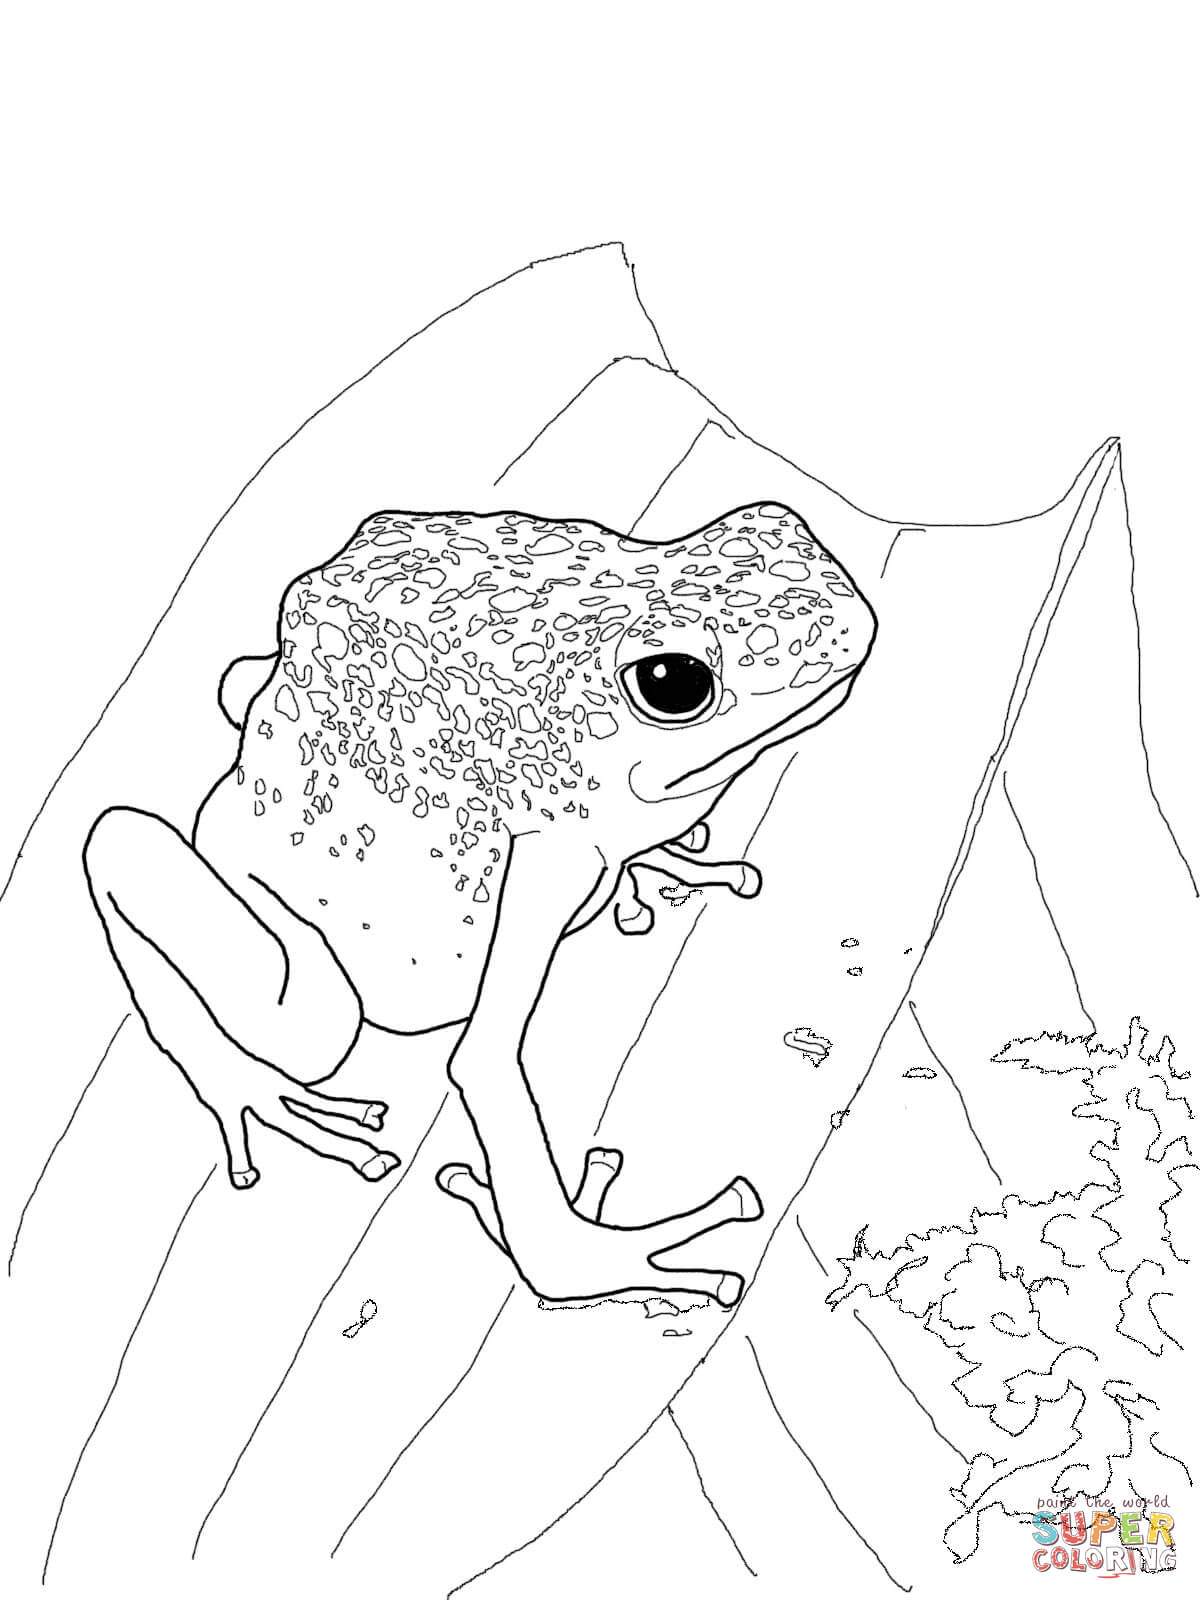 Blue Poison Dart Frog coloring #11, Download drawings